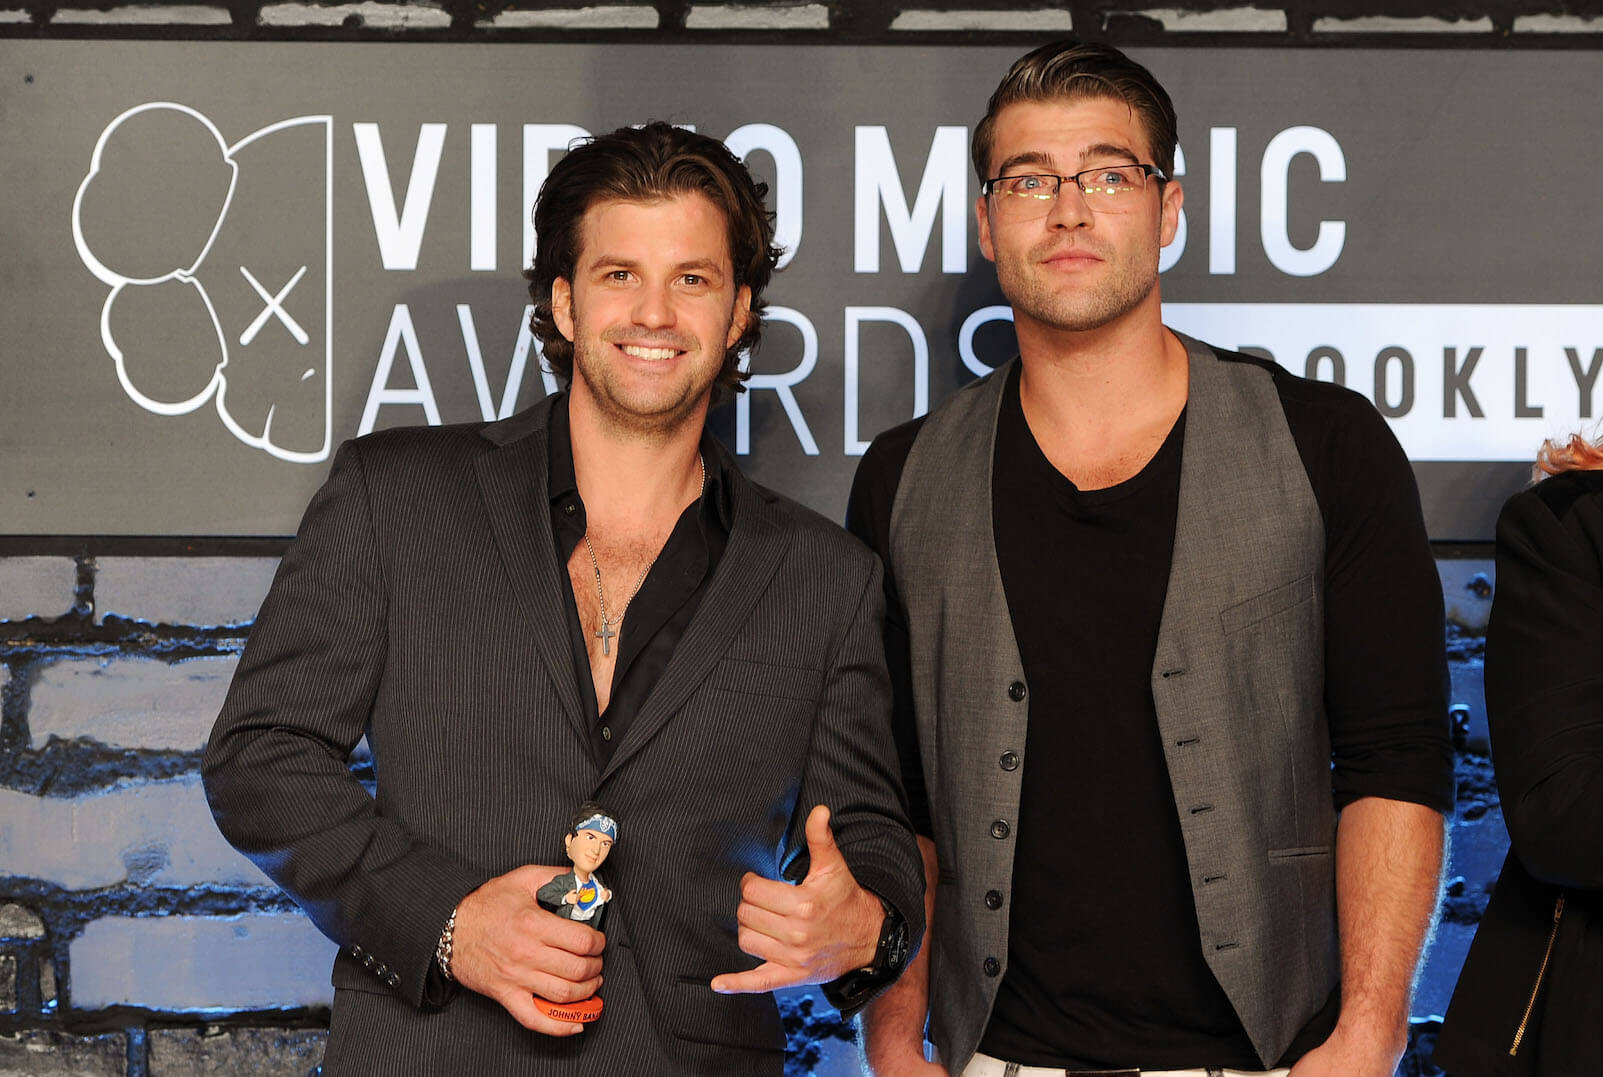 Johnny 'Bananas' Devenanzio and CT Tamburello from 'The Challenge' standing next to each other